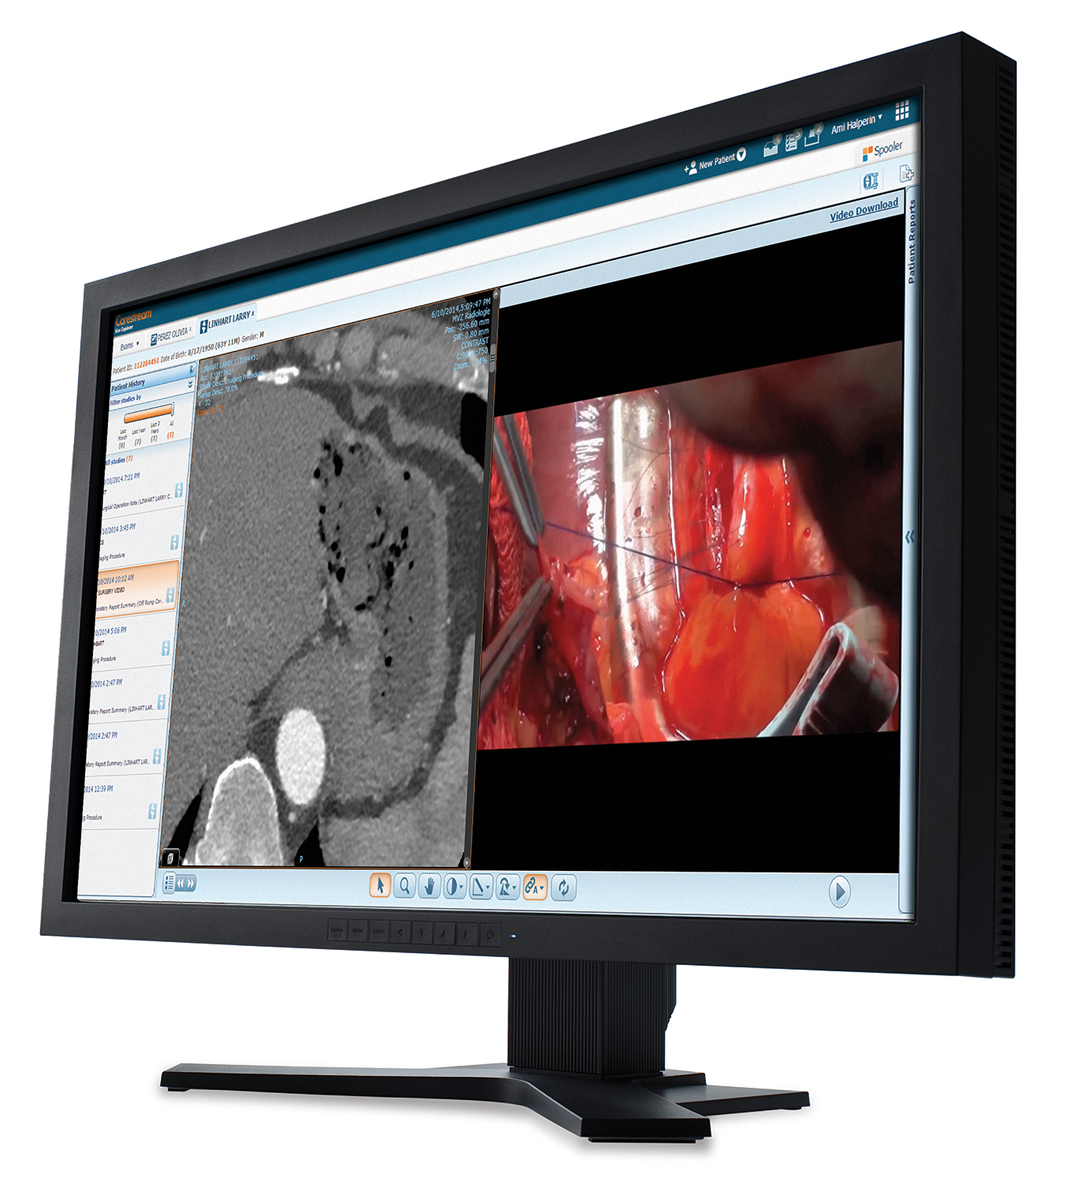 Carestream’s Workflow Orchestrator Optimizes Radiologist Assignment, Productivity for Radiology Group